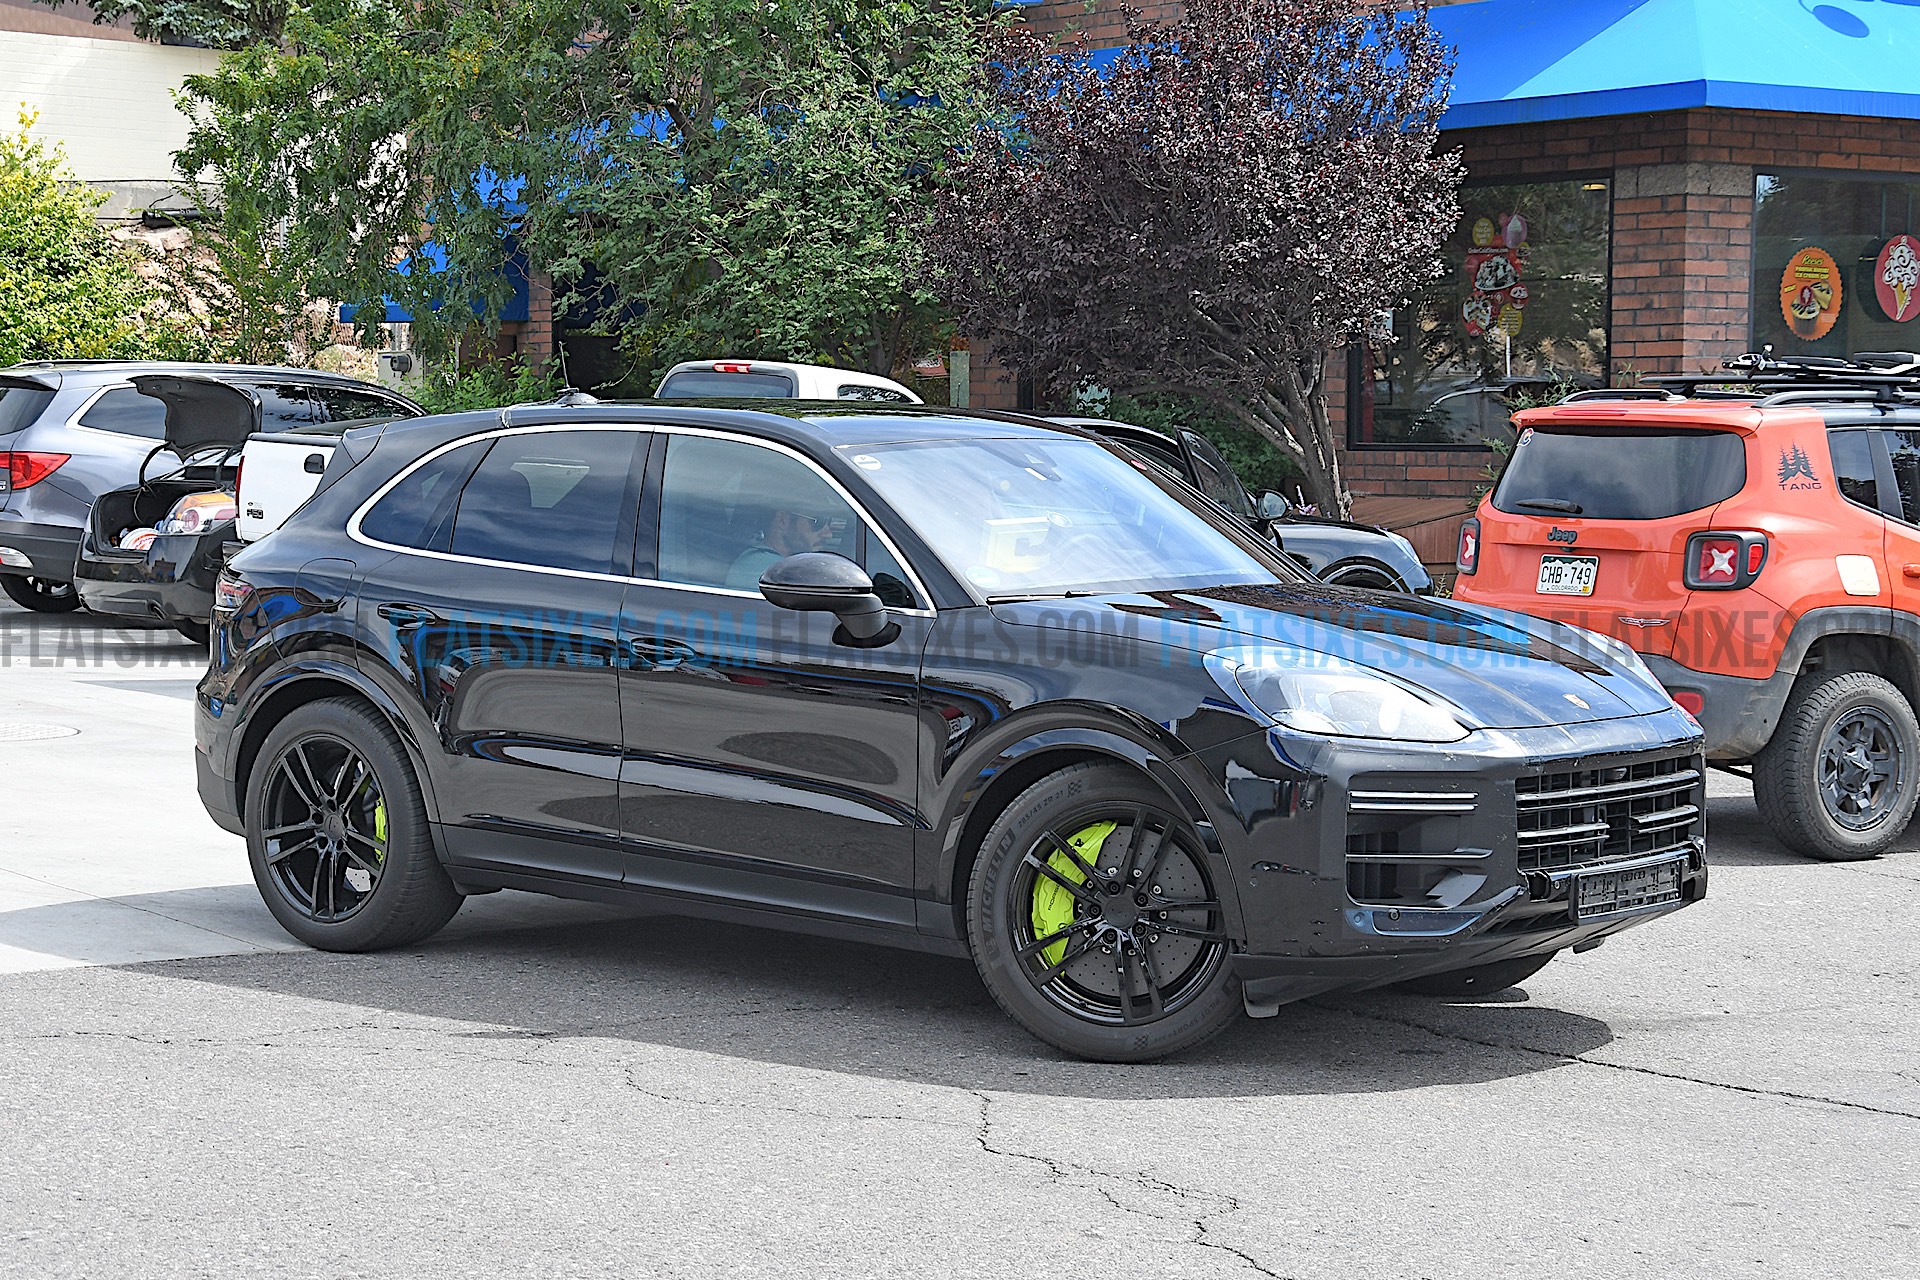 Facelifted 2023 Porsche Cayenne Turbo S E-Hybrid spied! | FLATSIXES